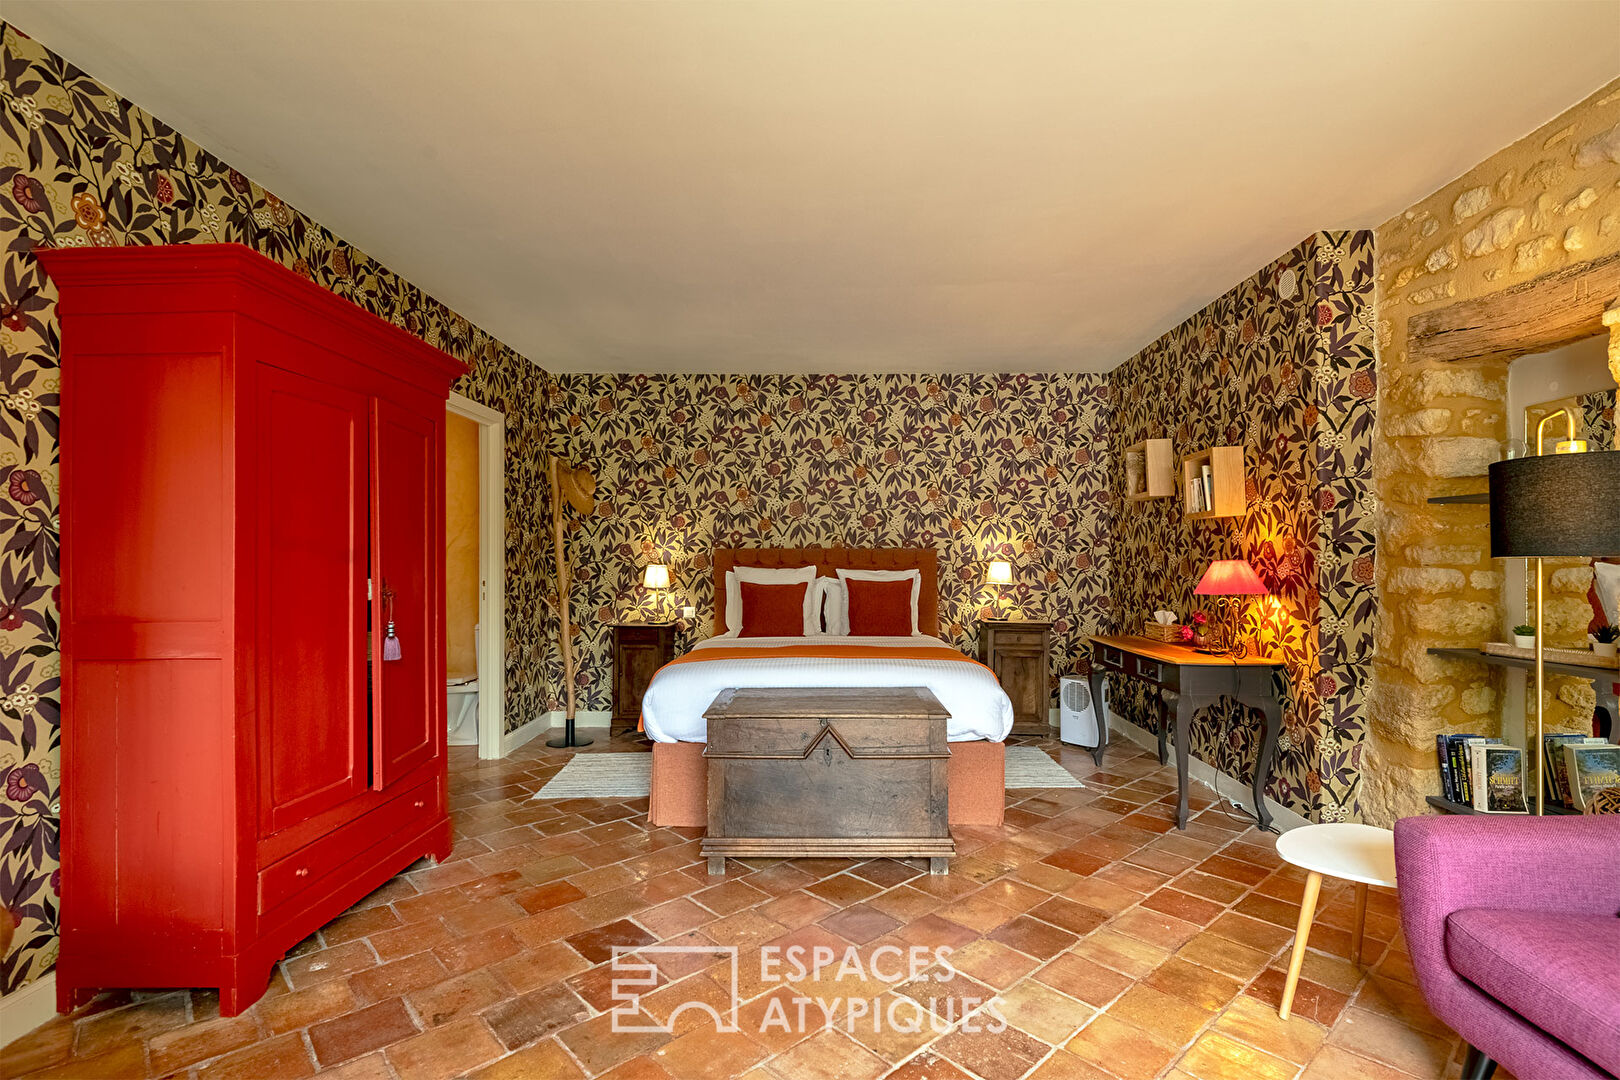 The 18th century Périgourdine residence and its sublime guest rooms.